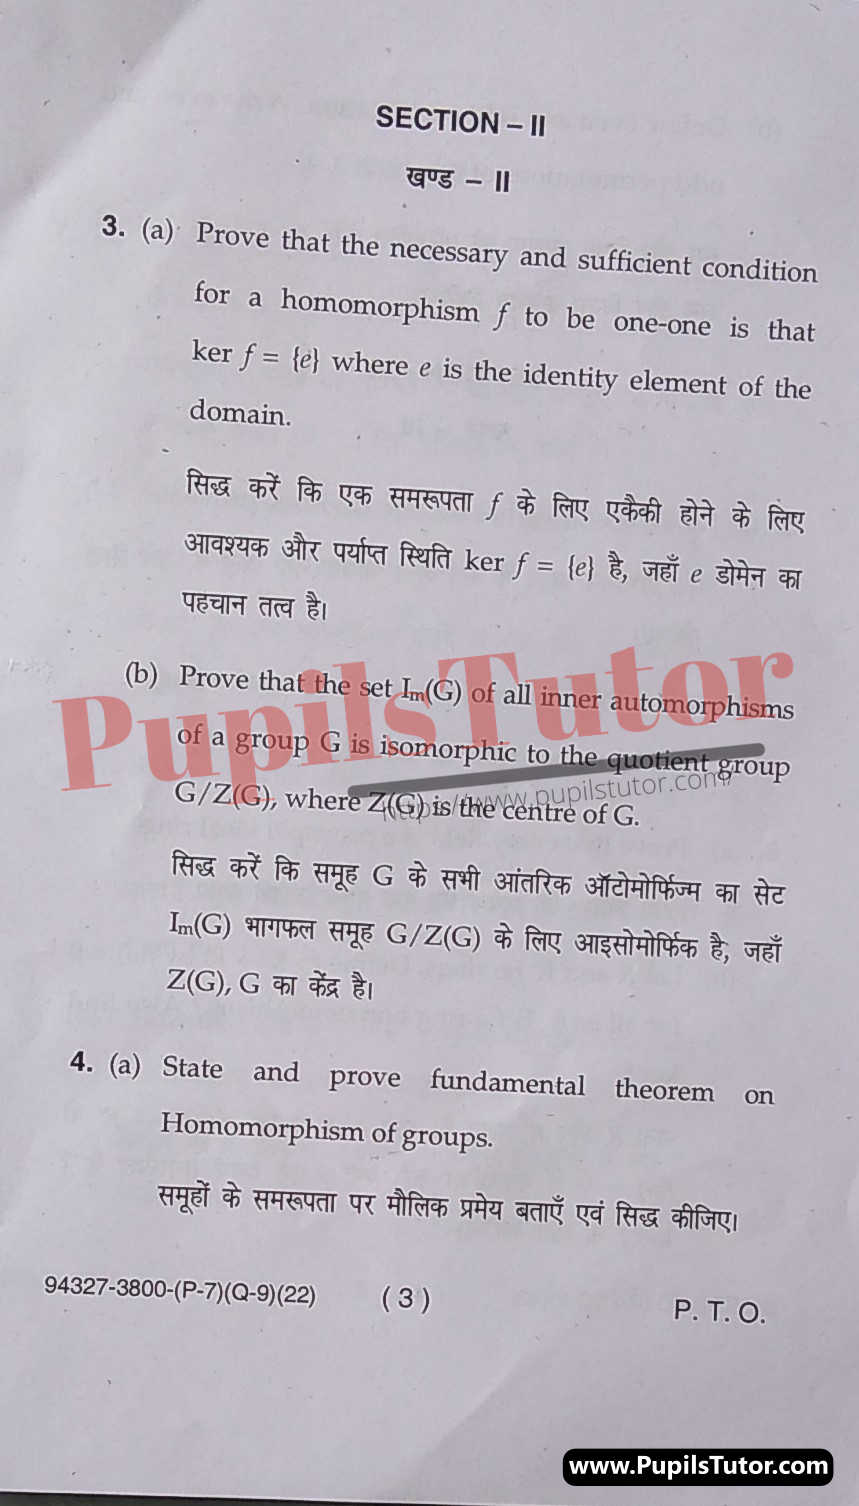 Free Download PDF Of M.D. University B.A. 5th Semester Latest Question Paper For Groups And Rings Math Subject (Page 3) - https://www.pupilstutor.com